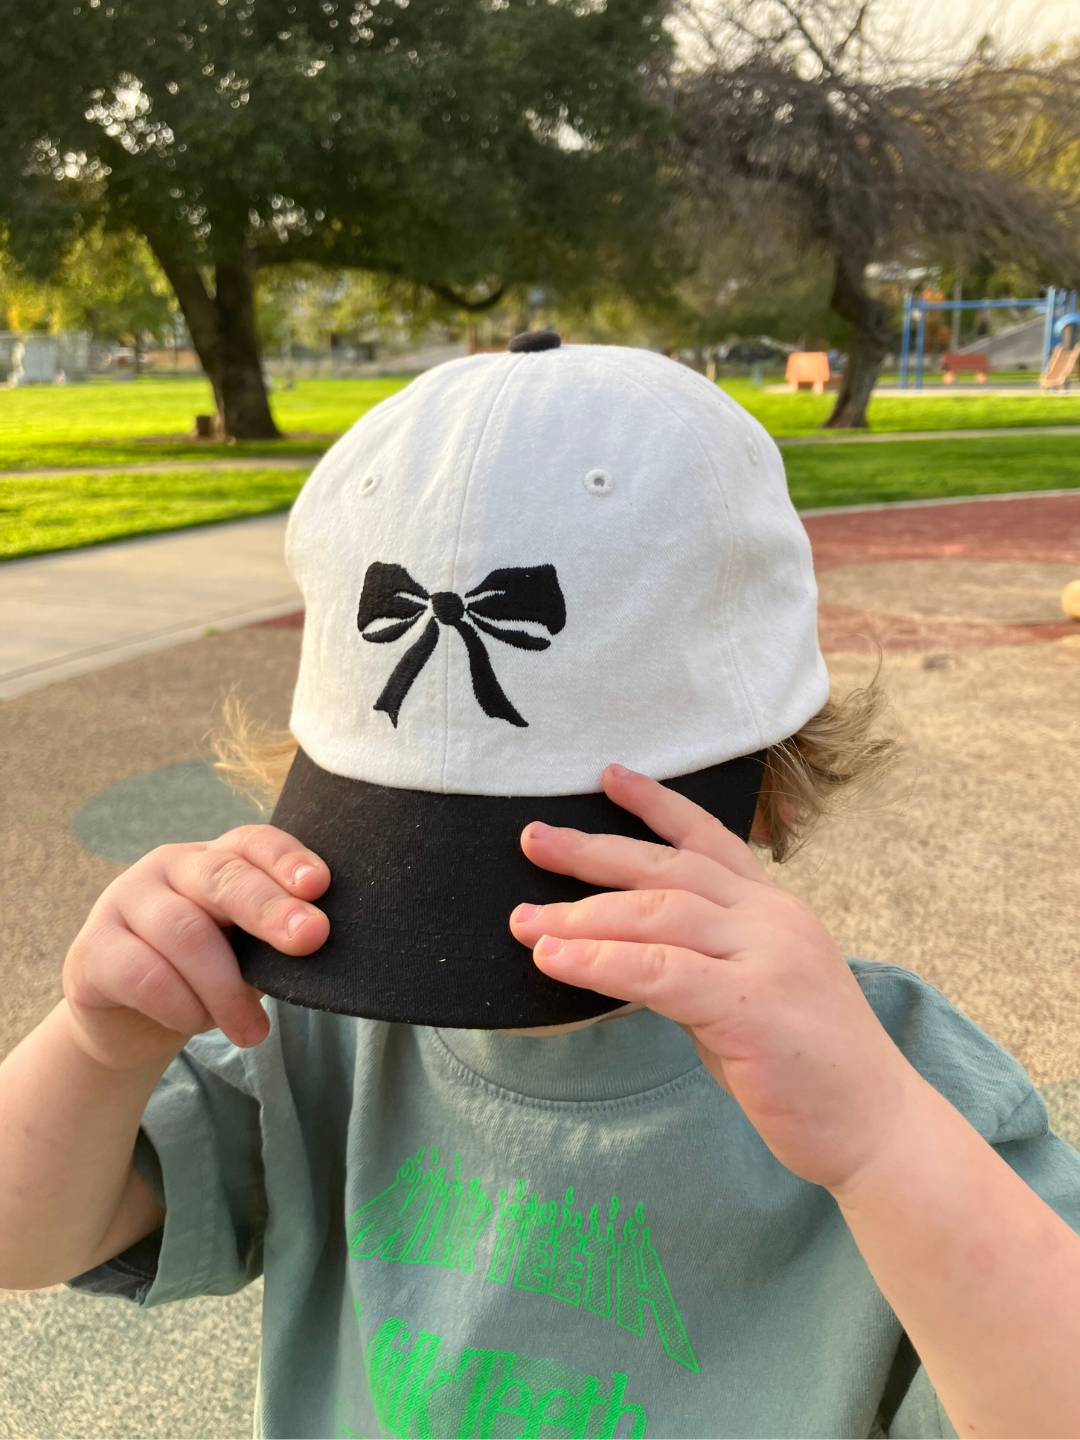 Boy wearing the bow baseball cap in white with a black brim and a black embroidered bow. He cpvers his face with the hat, and wears a green t-shirt with neon green Milk Teeth lettering, outdoors in a playground.